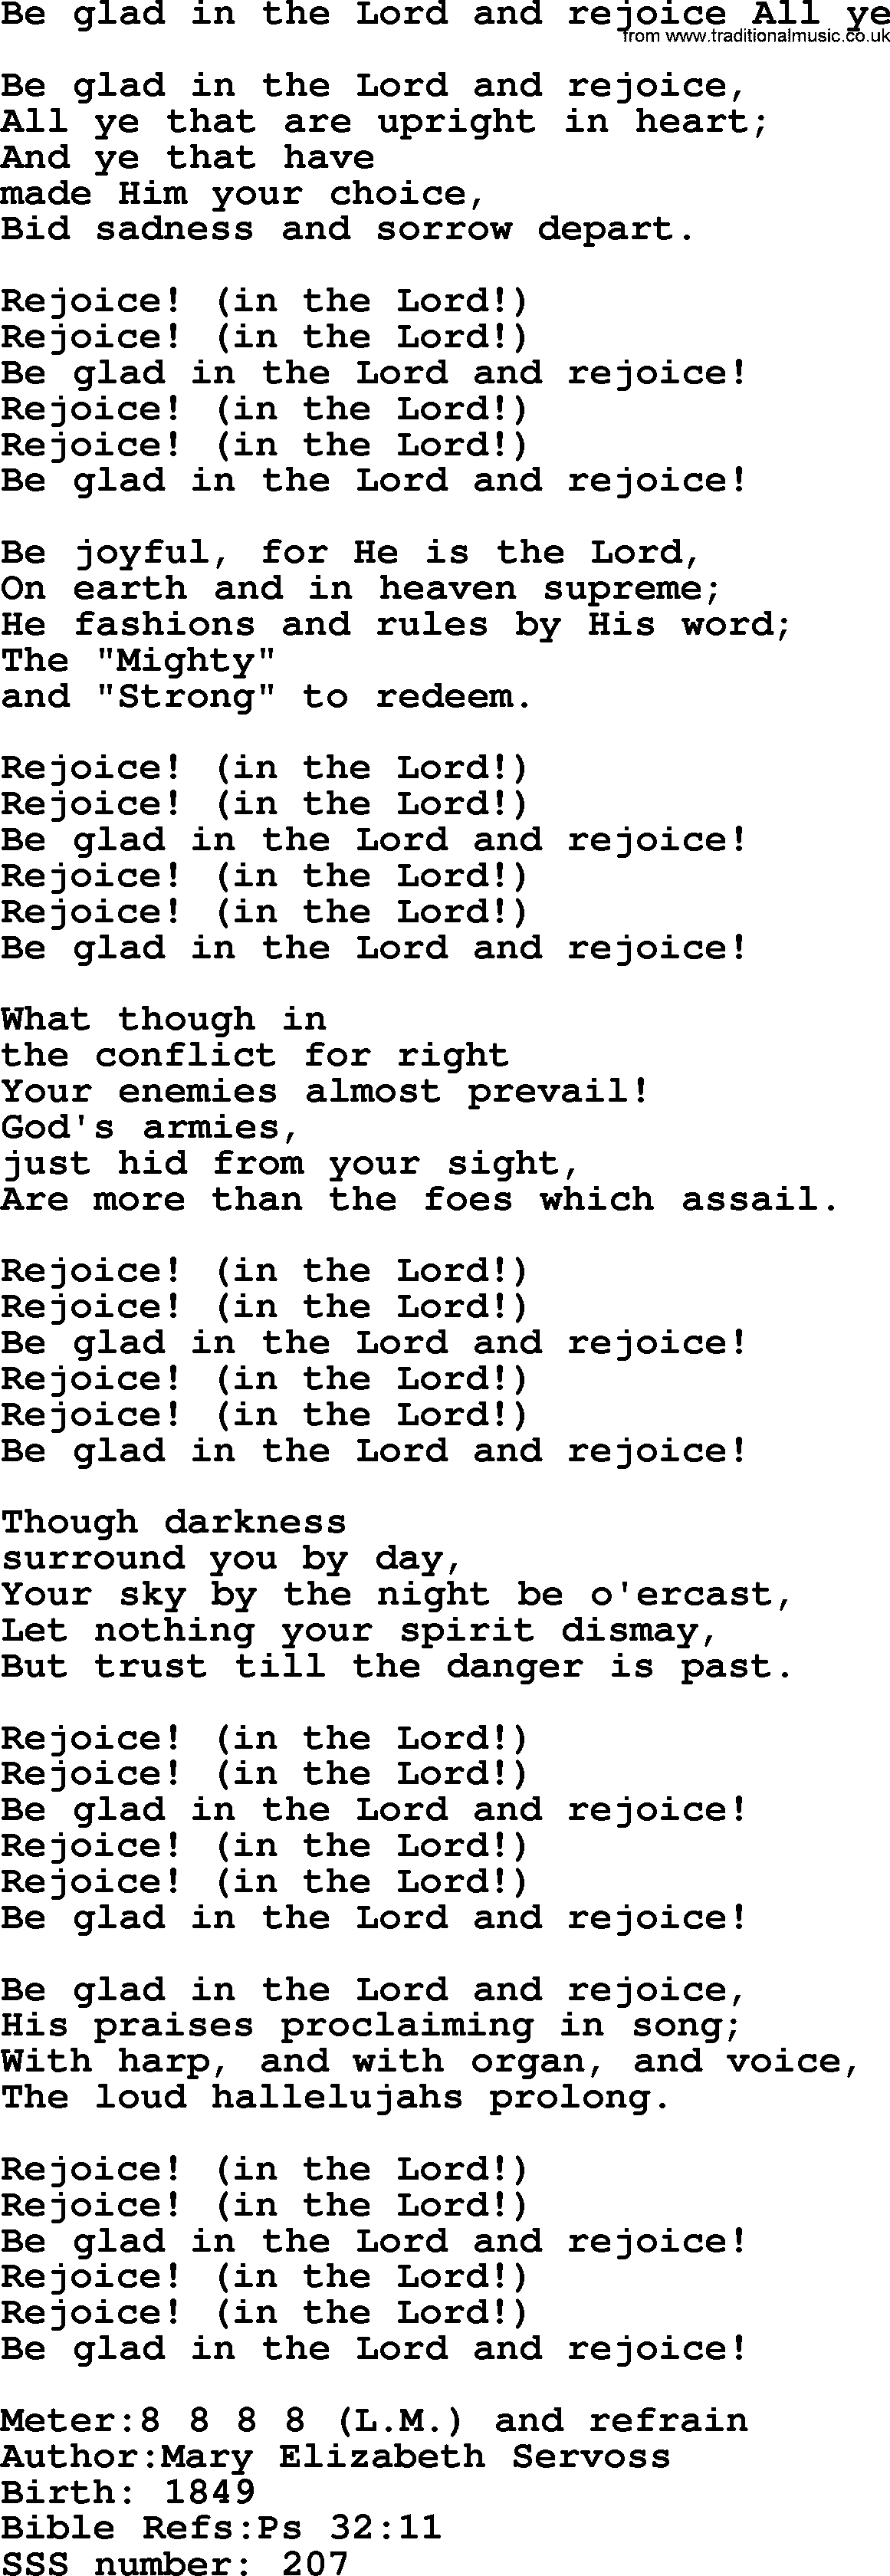 Sacred Songs and Solos complete, 1200 Hymns, title: Be Glad In The Lord And Rejoice All Ye, lyrics and PDF